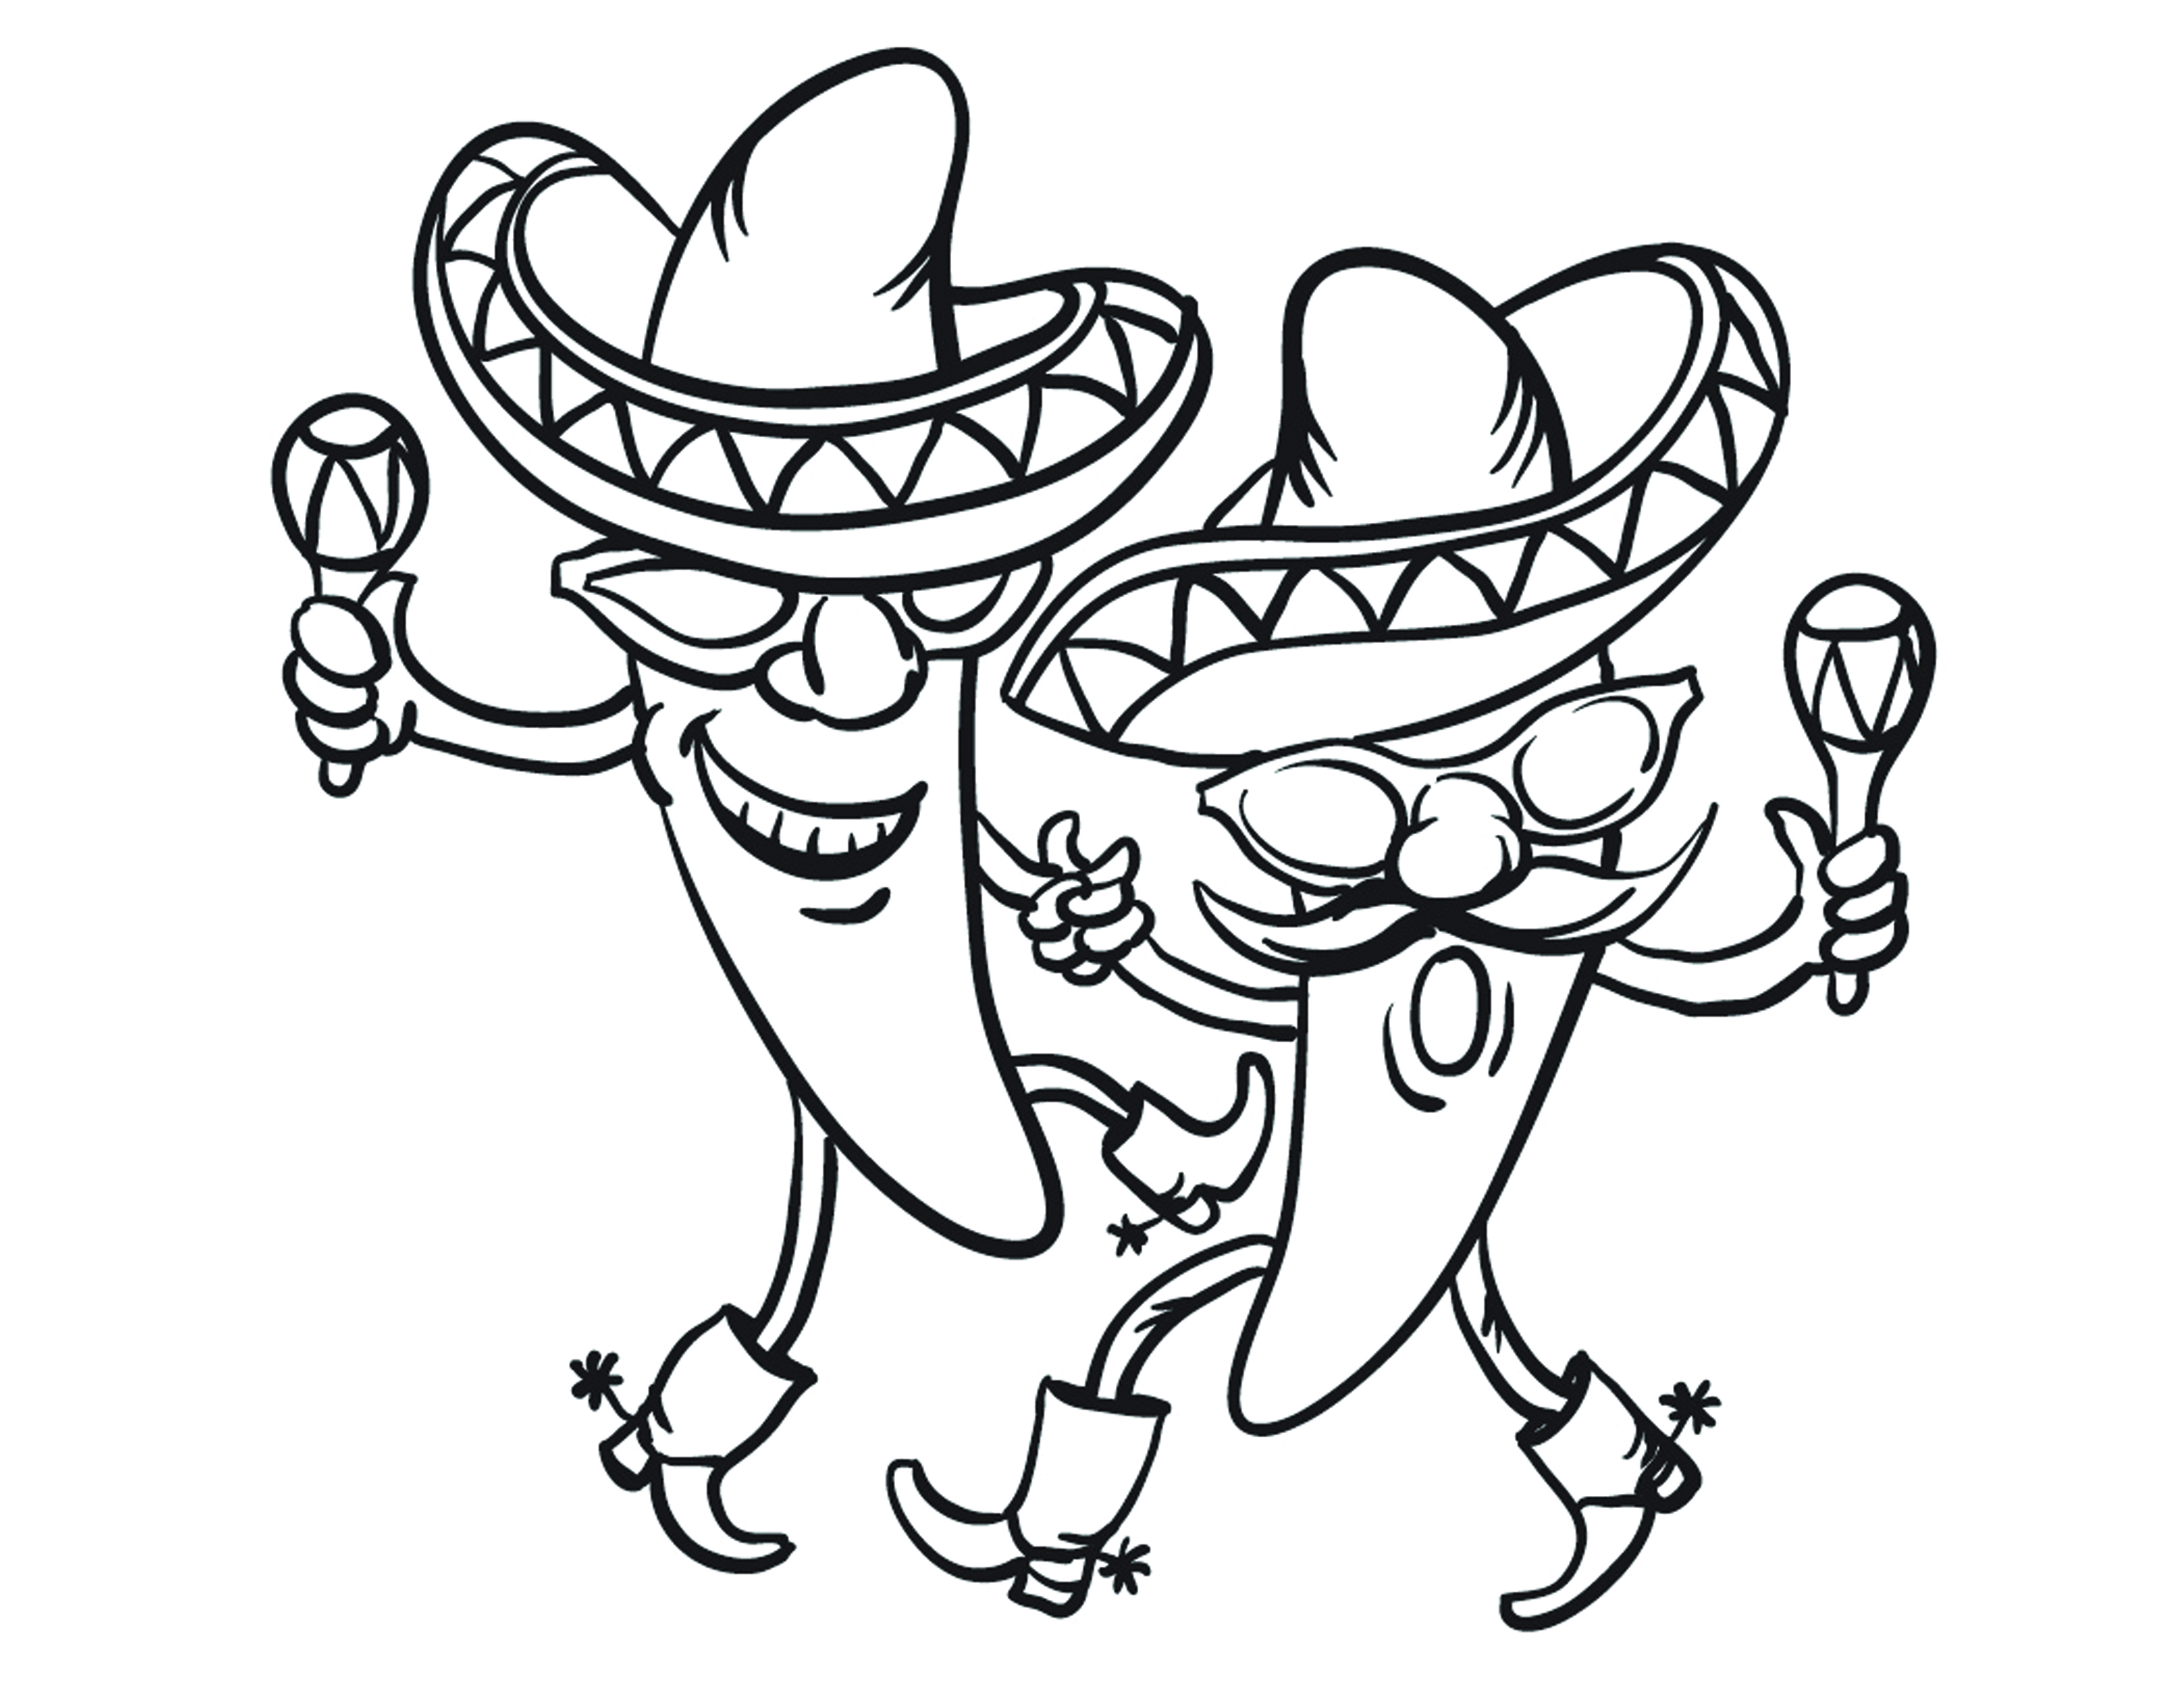 Download Restaurant Coloring Pages at GetDrawings.com | Free for personal use Restaurant Coloring Pages ...